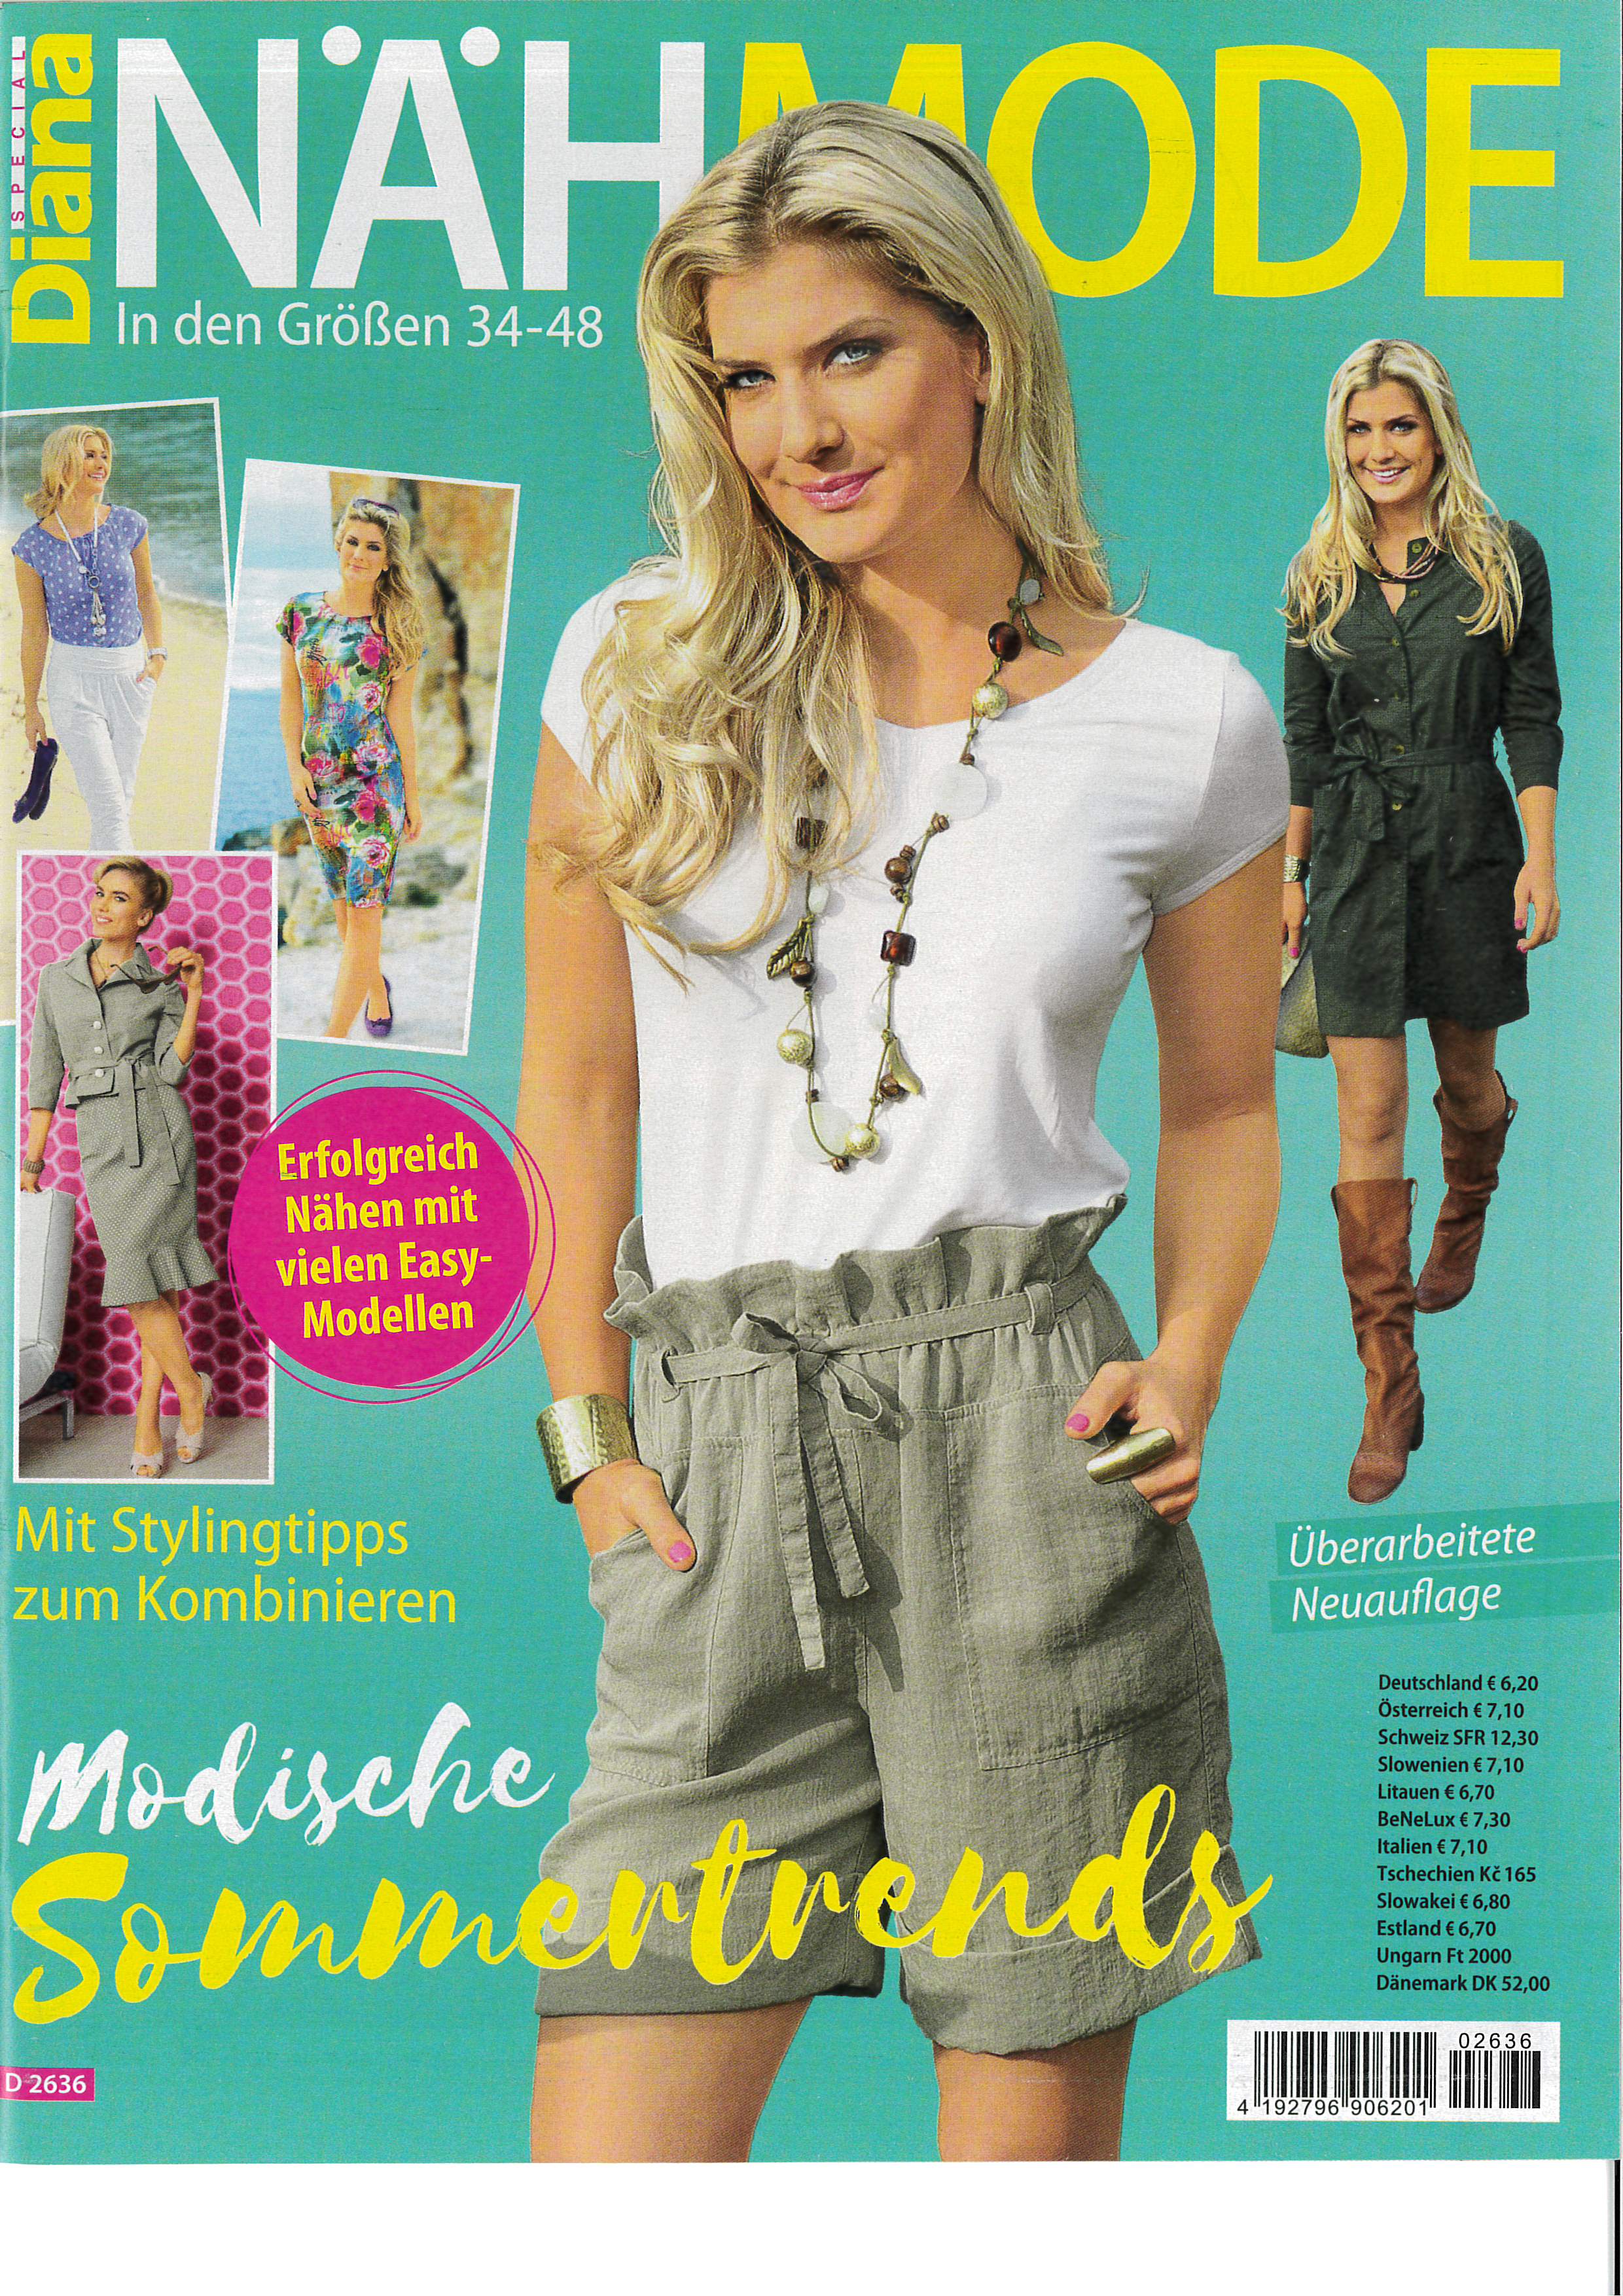 Diana Special D 2636 - Modische Sommertrends